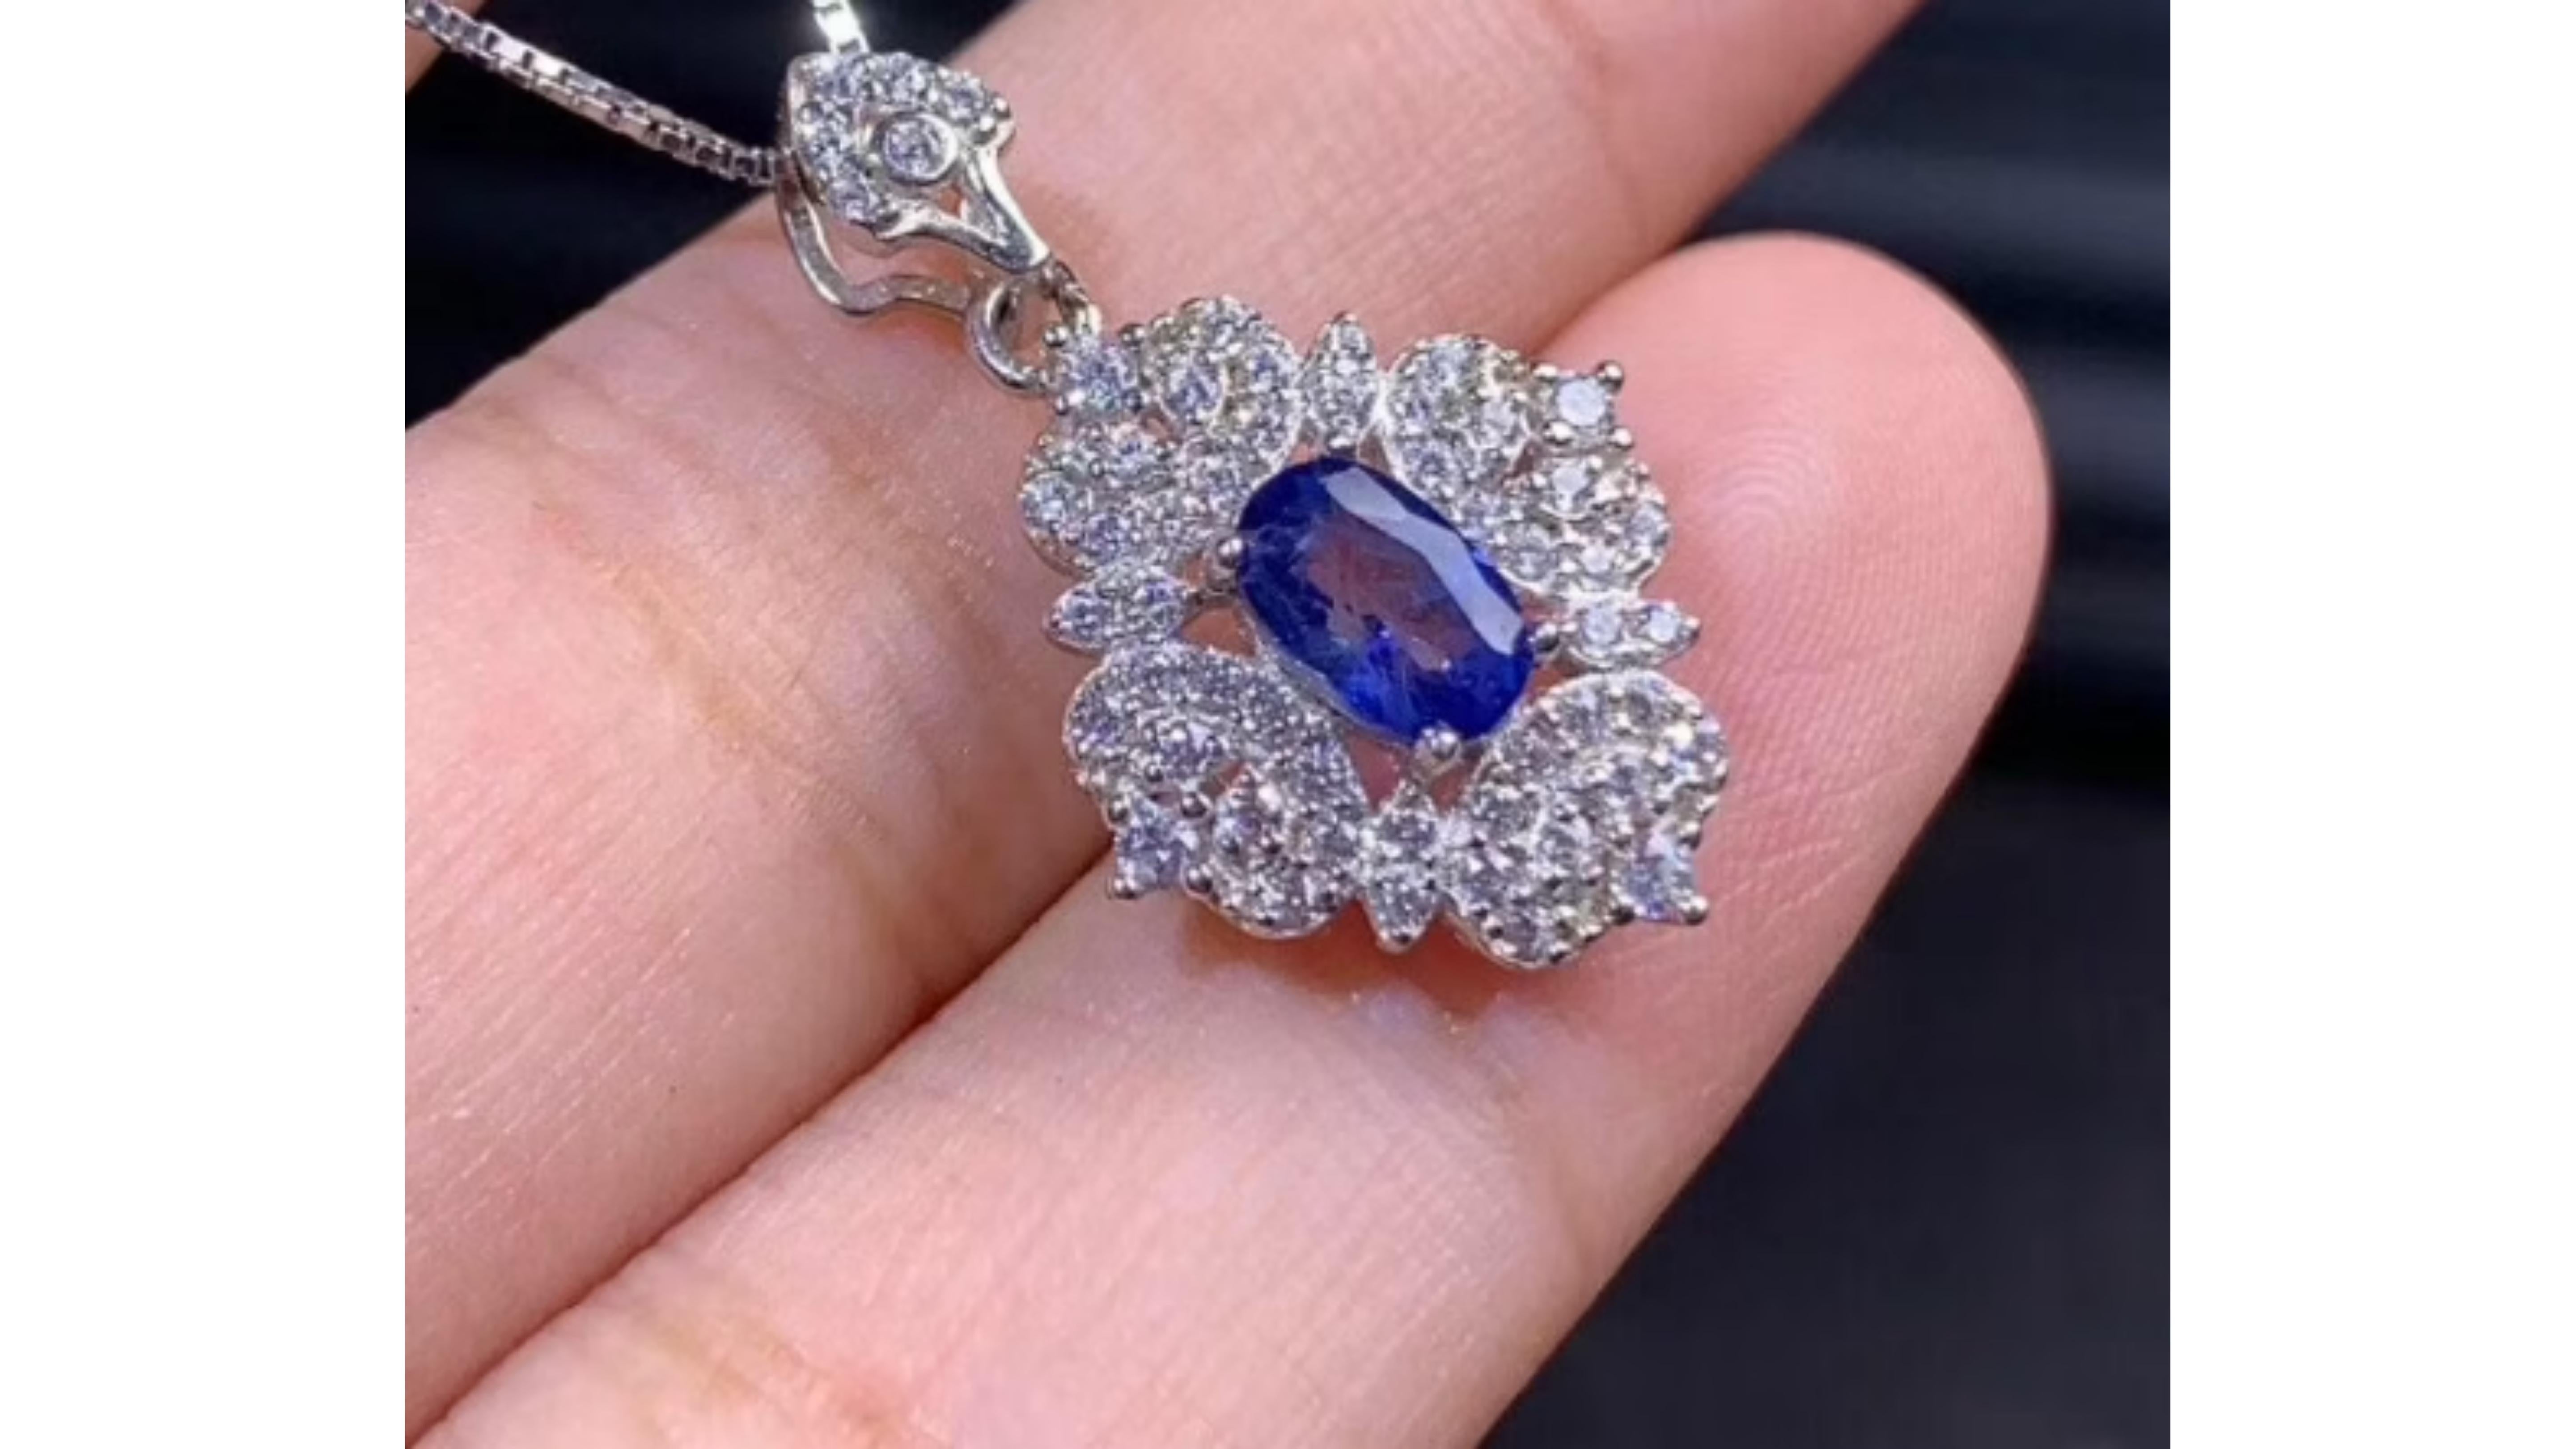 Blue  Oval Sapphire Necklace with accent stones stands out in the platinum plated metal too.

In ancient Greece and Rome, kings and queens were convinced that blue sapphires protected their owners from envy and harm. ... During the Middle Ages, the